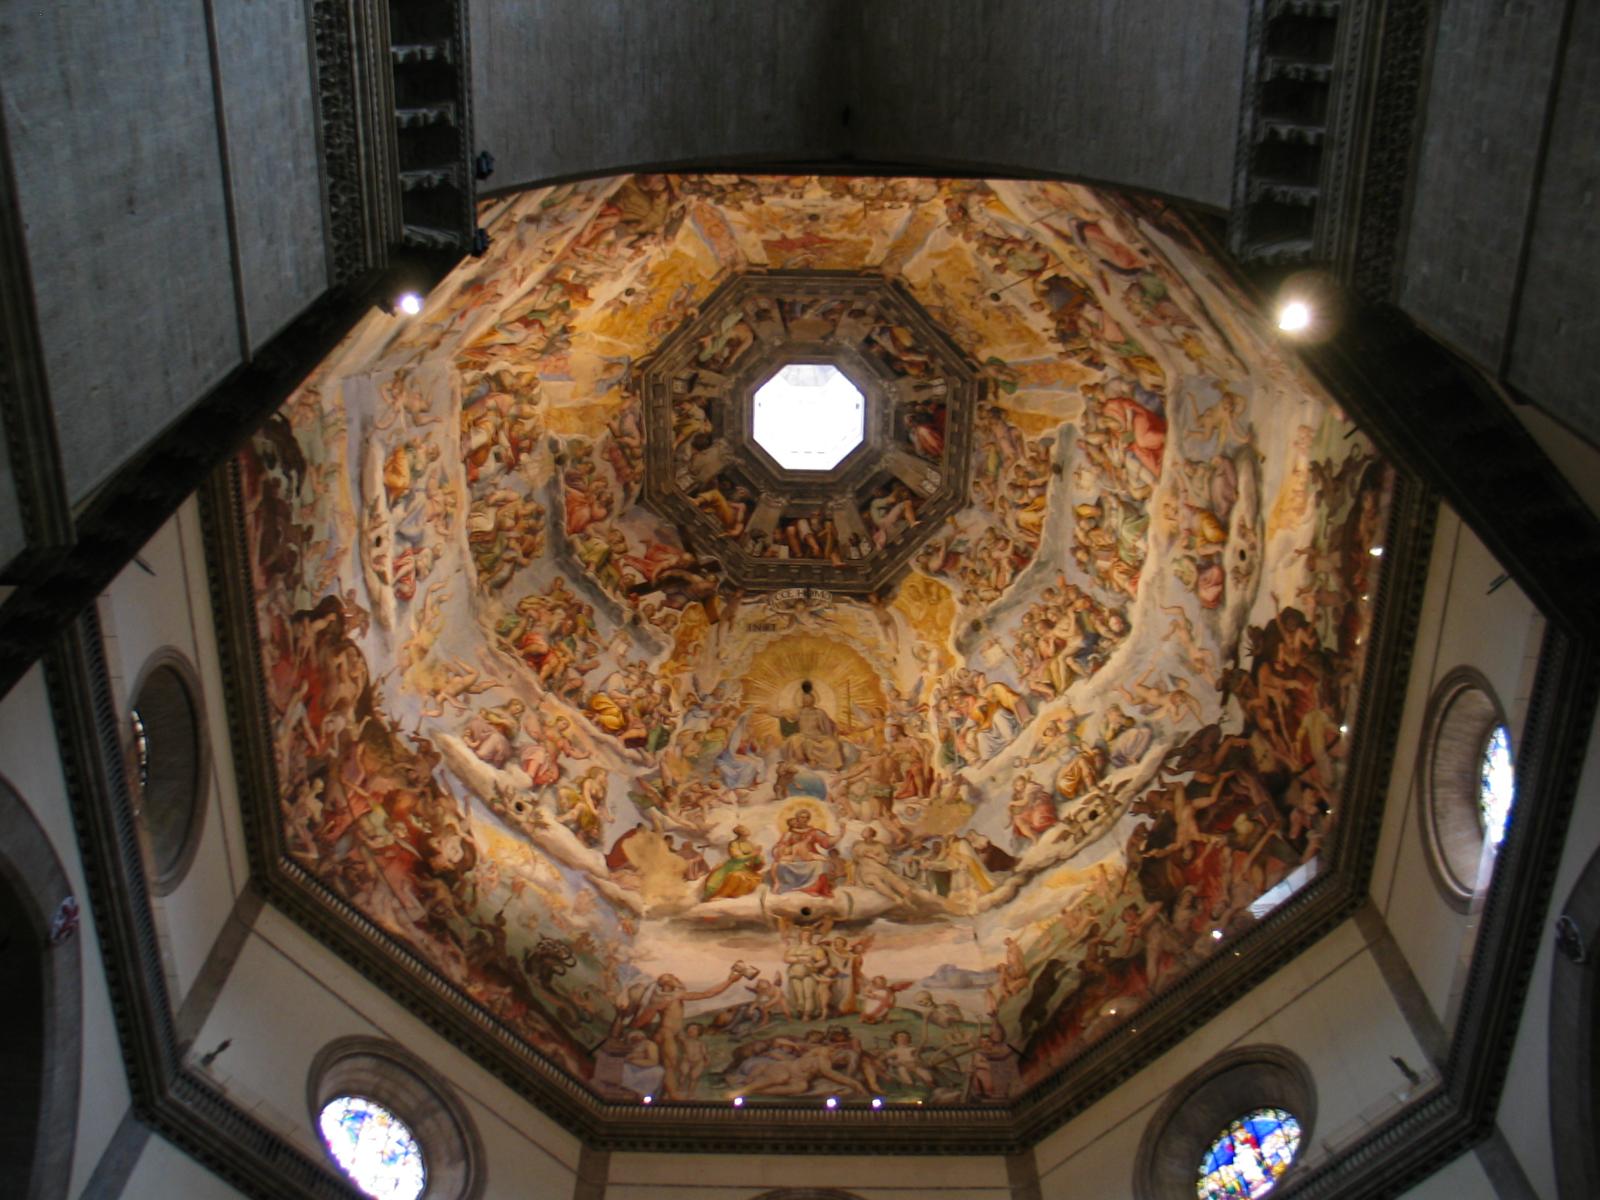 The roof of the Duomo